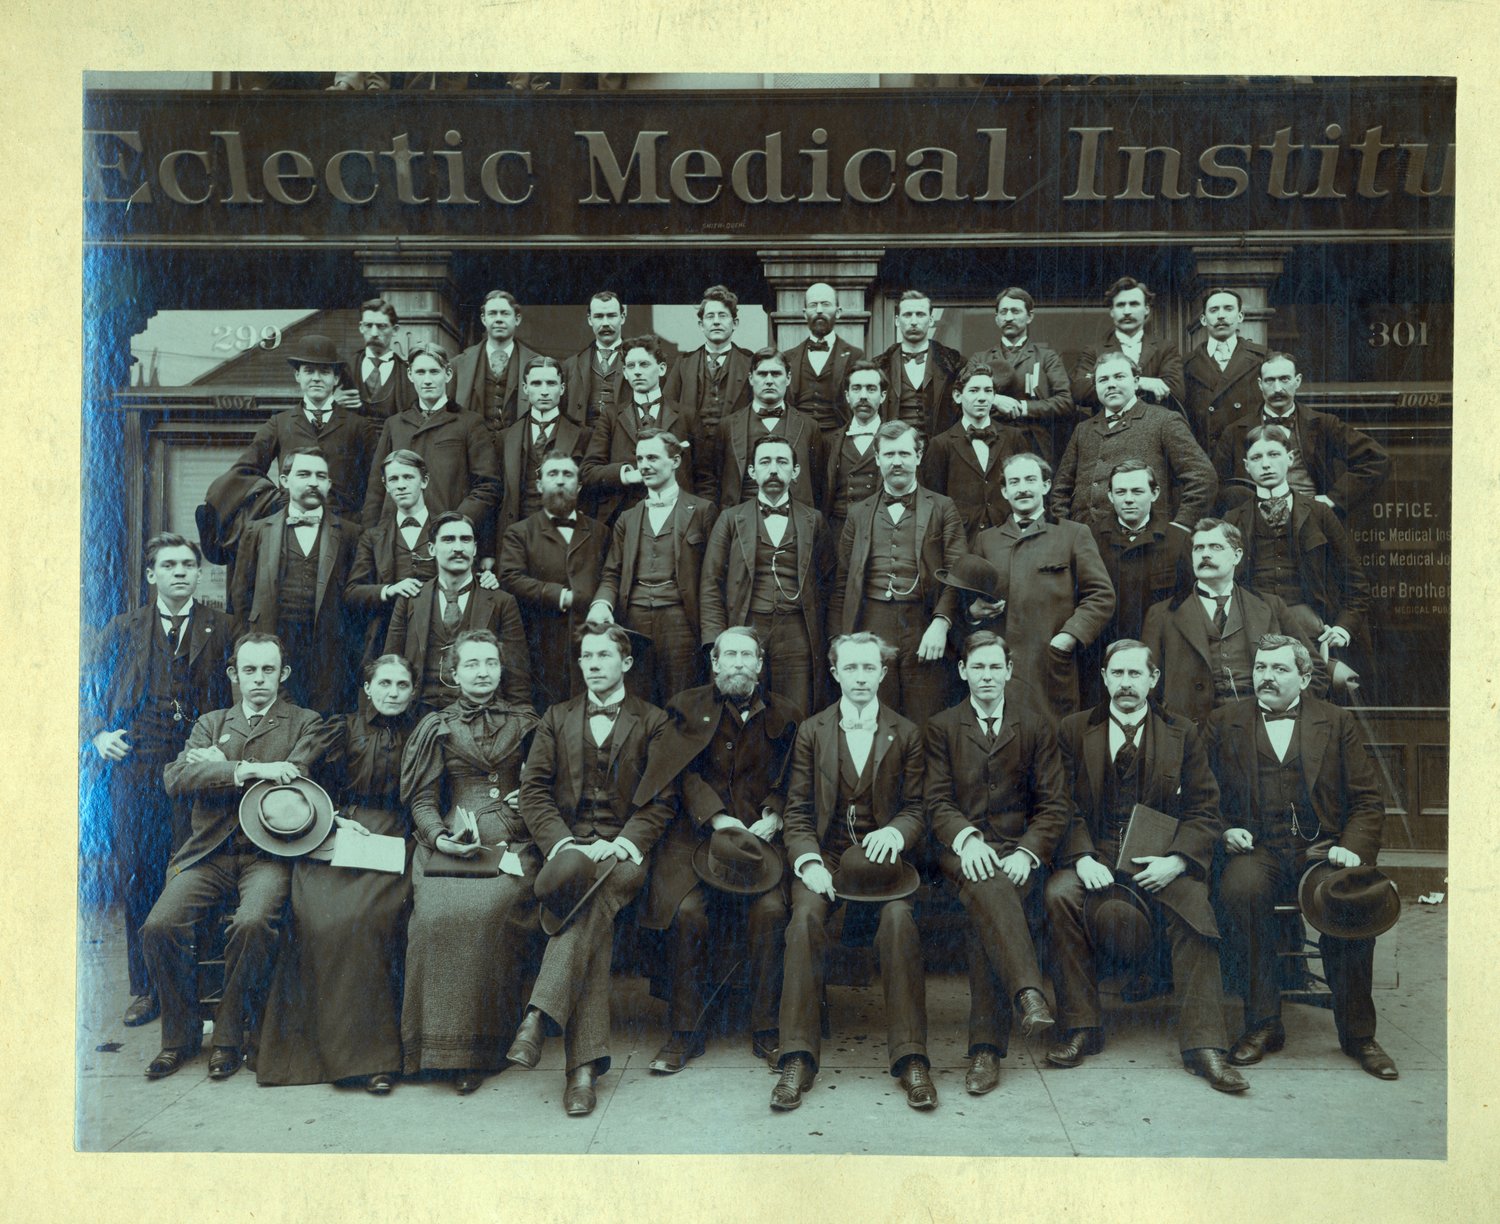 Graduates of the Eclectic Medical Institute in Cincinnati, ca 1890. Note the women in the front row.